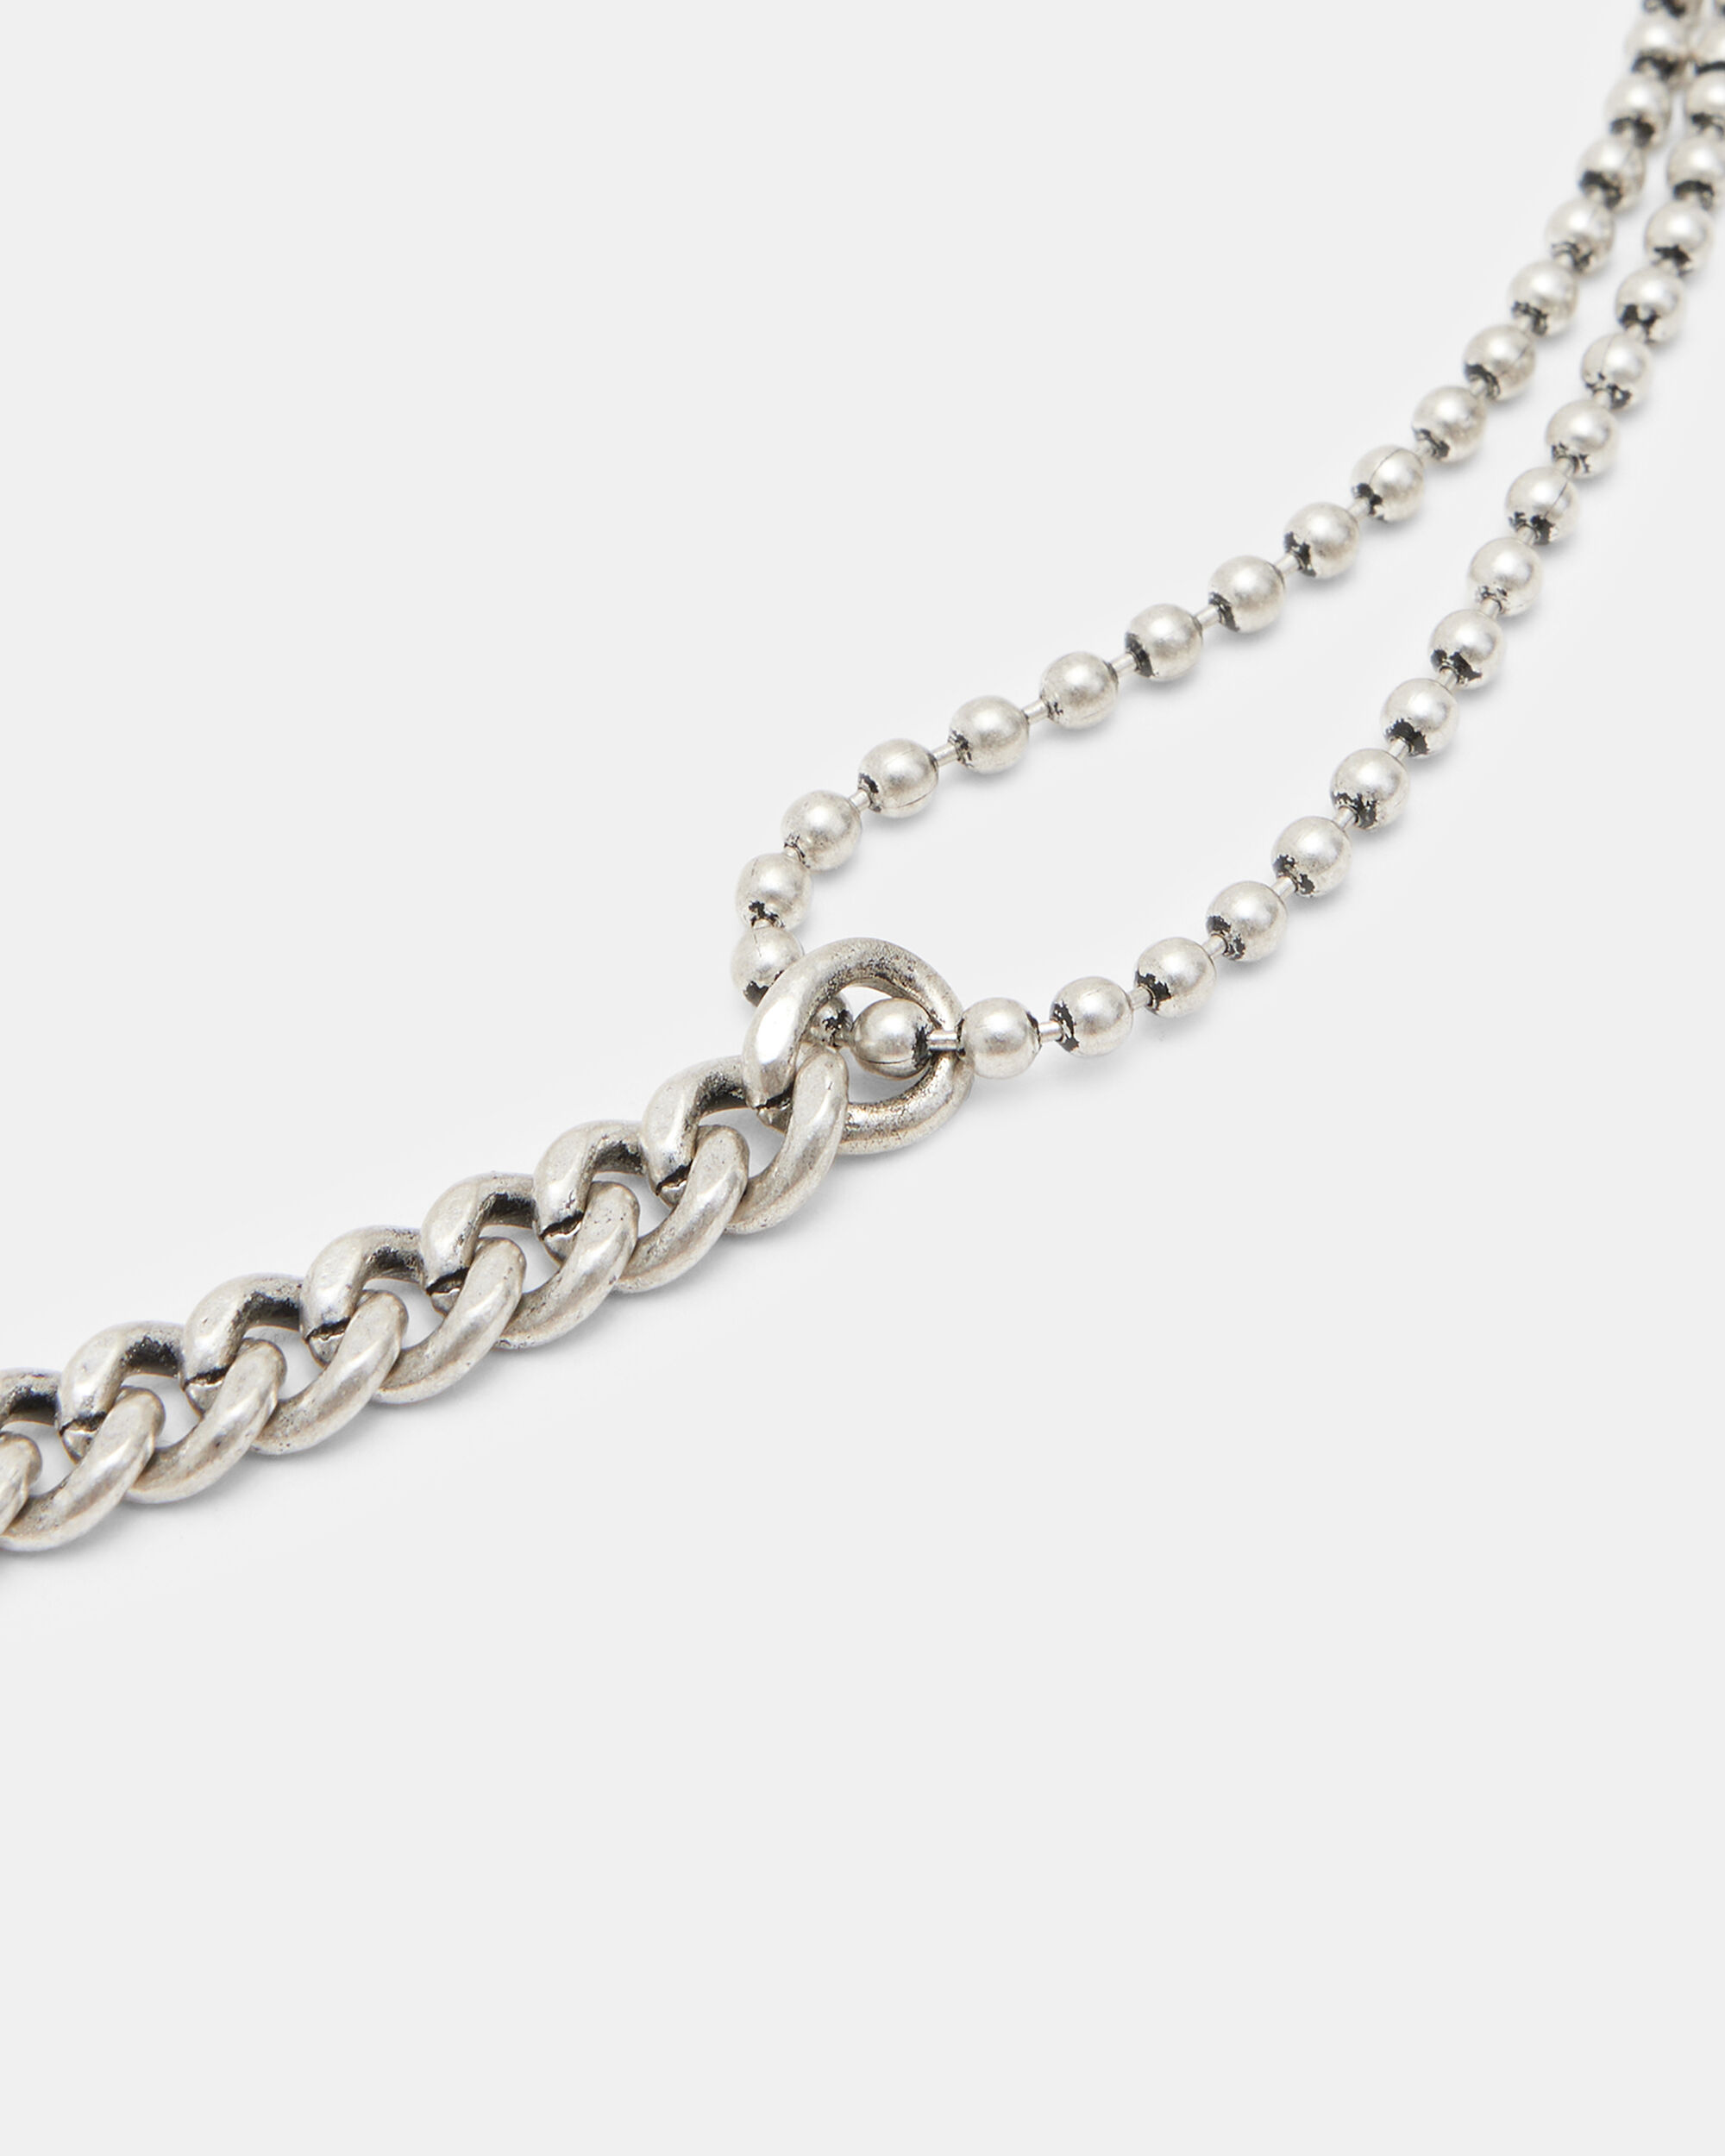 Cai Sterling Silver Mixed Chain Necklace WARM SILVER ALLSAINTS